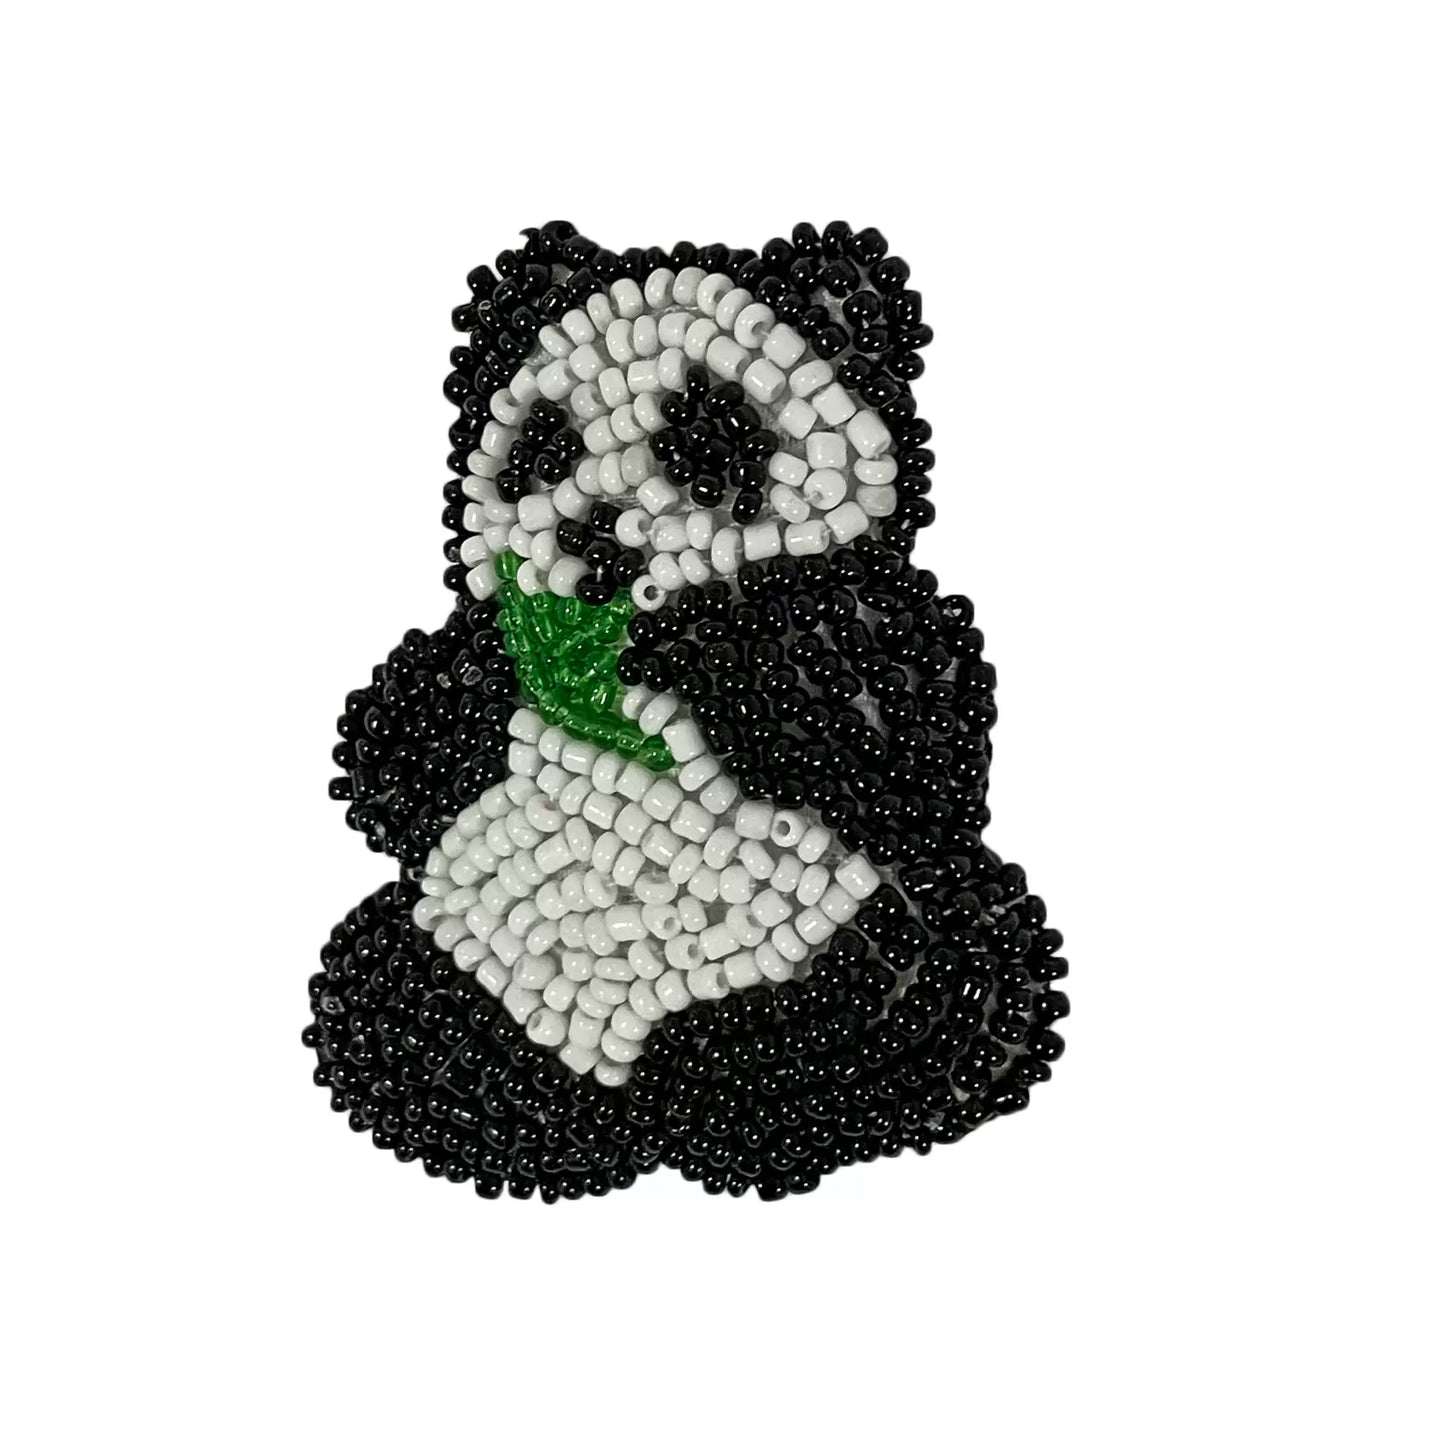 bead embroidered panda brooch accessories 